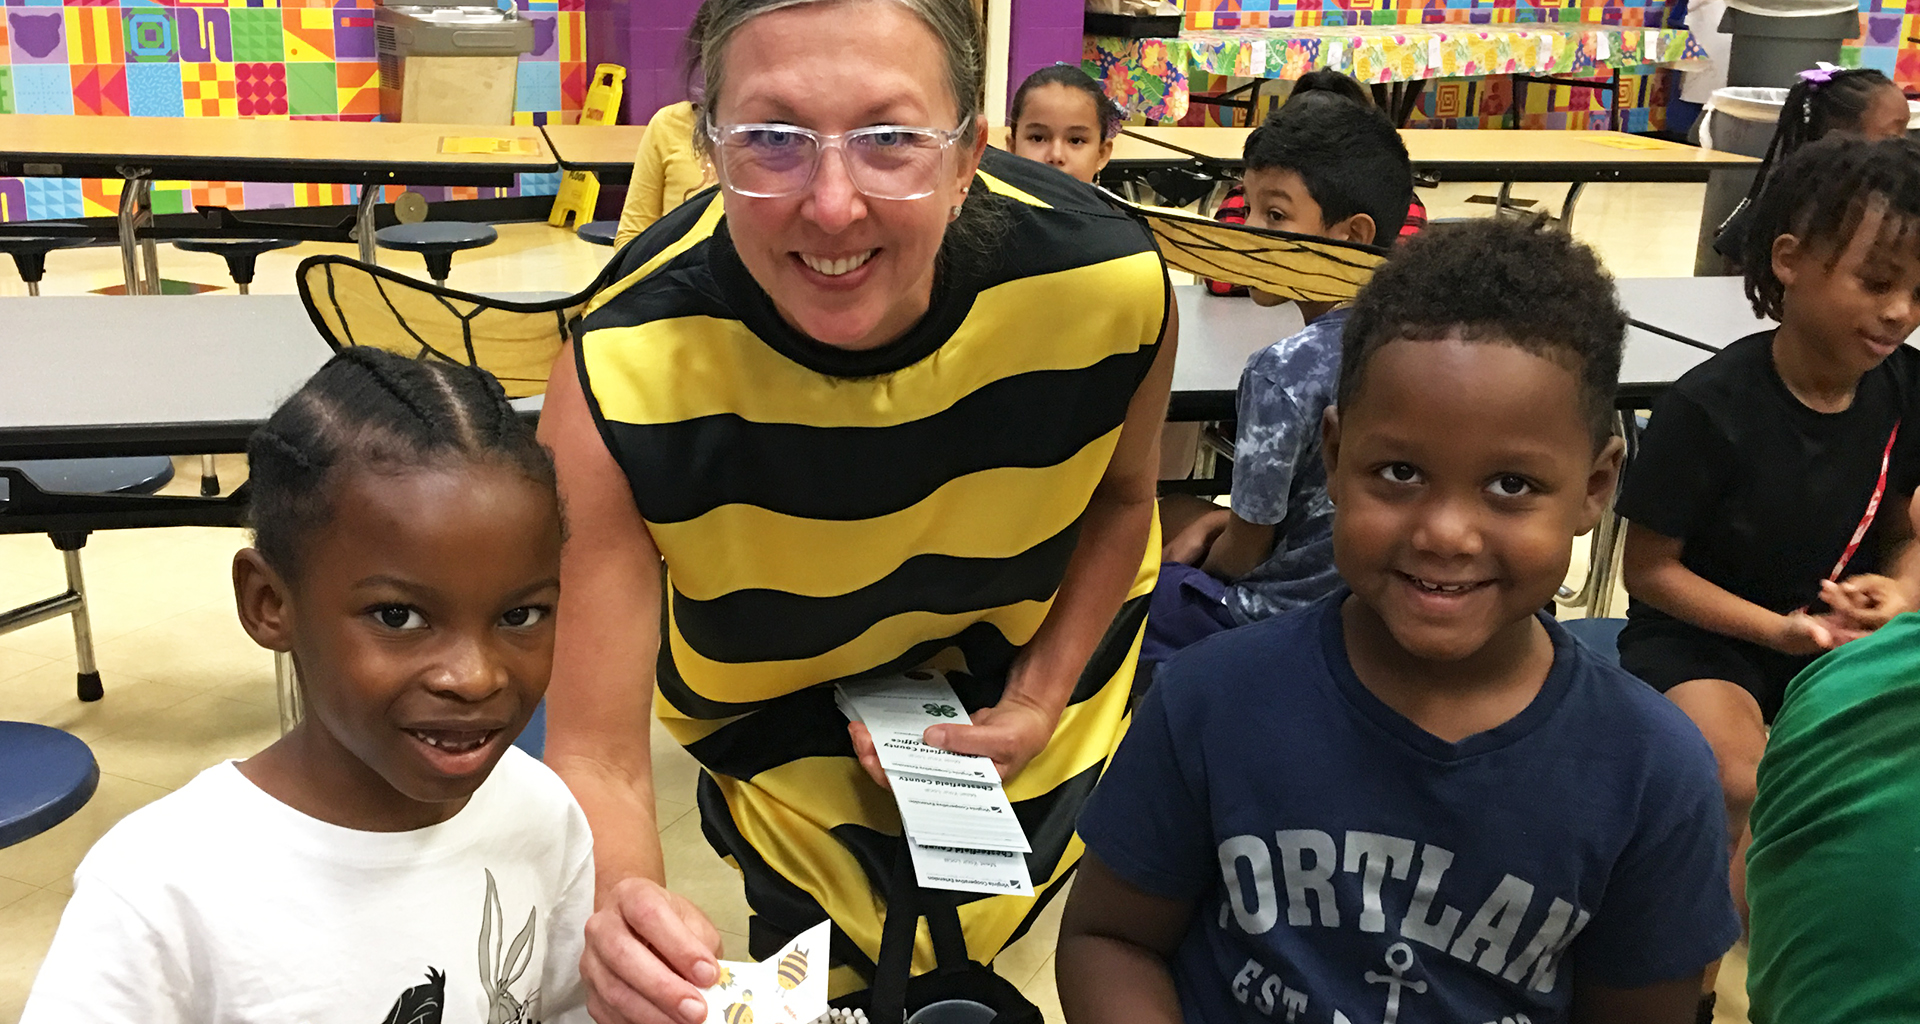 Two students and a special guest dressed as a bee pose for a photo.